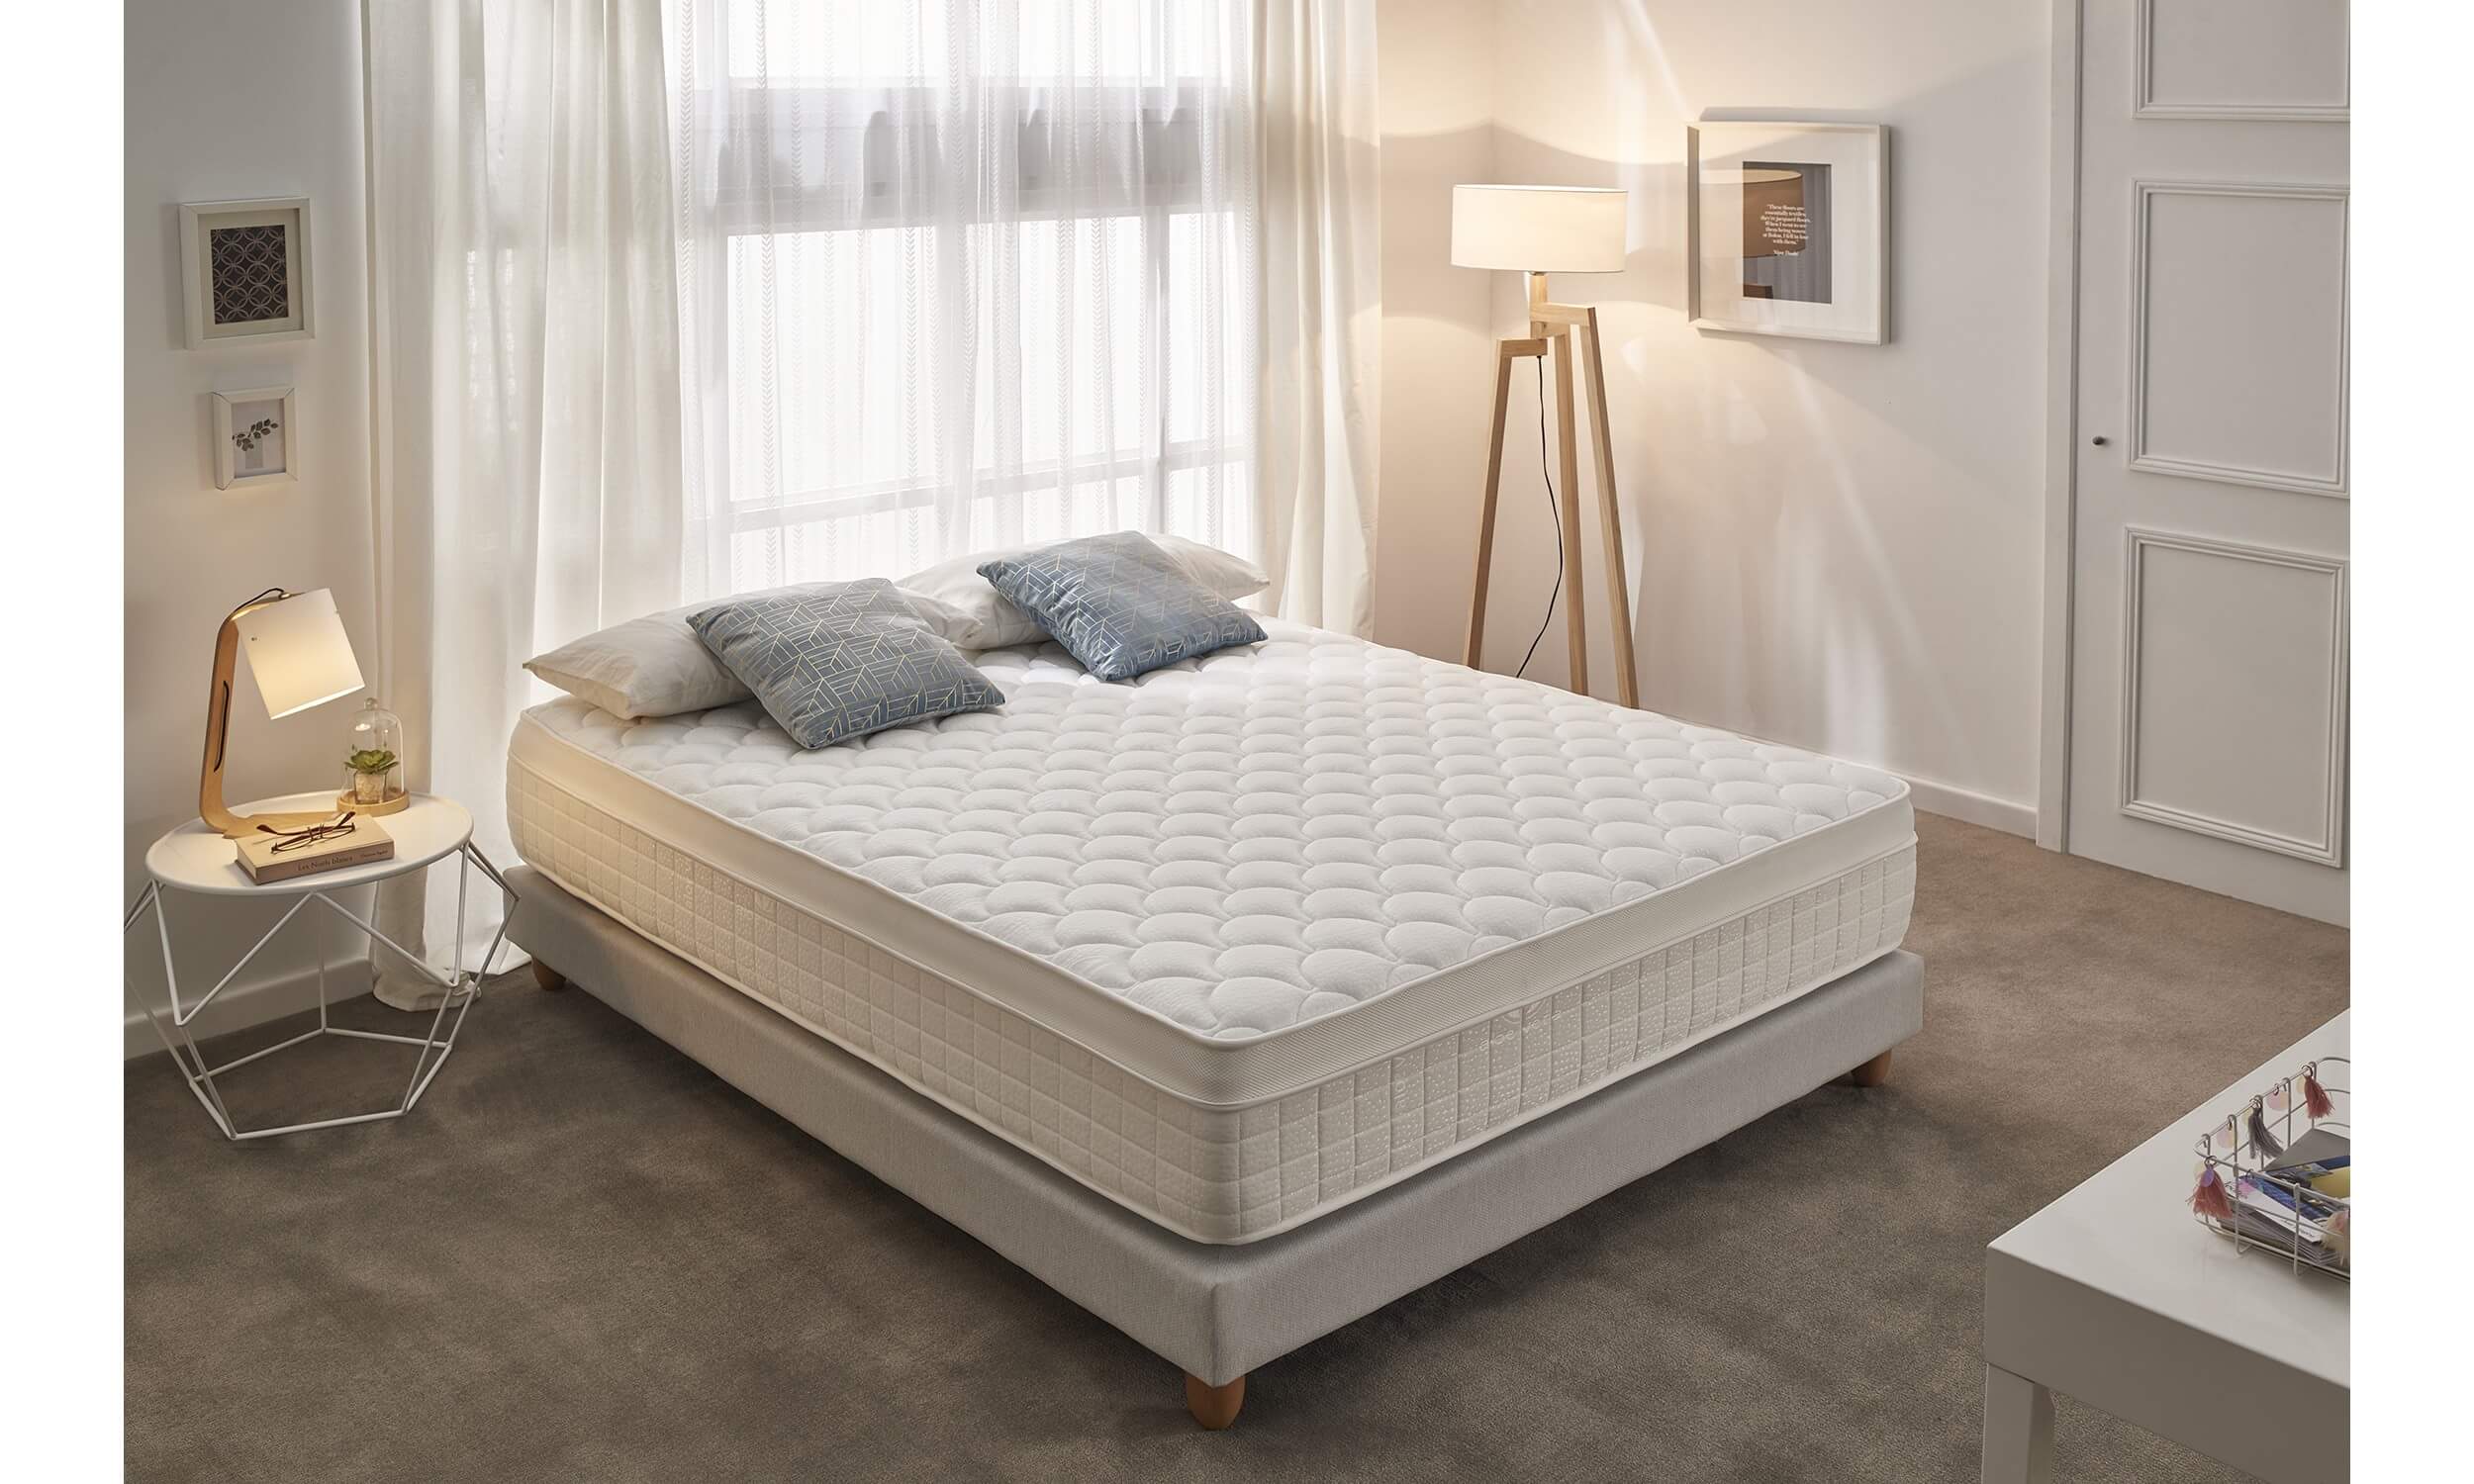 box spring and mattress on floor